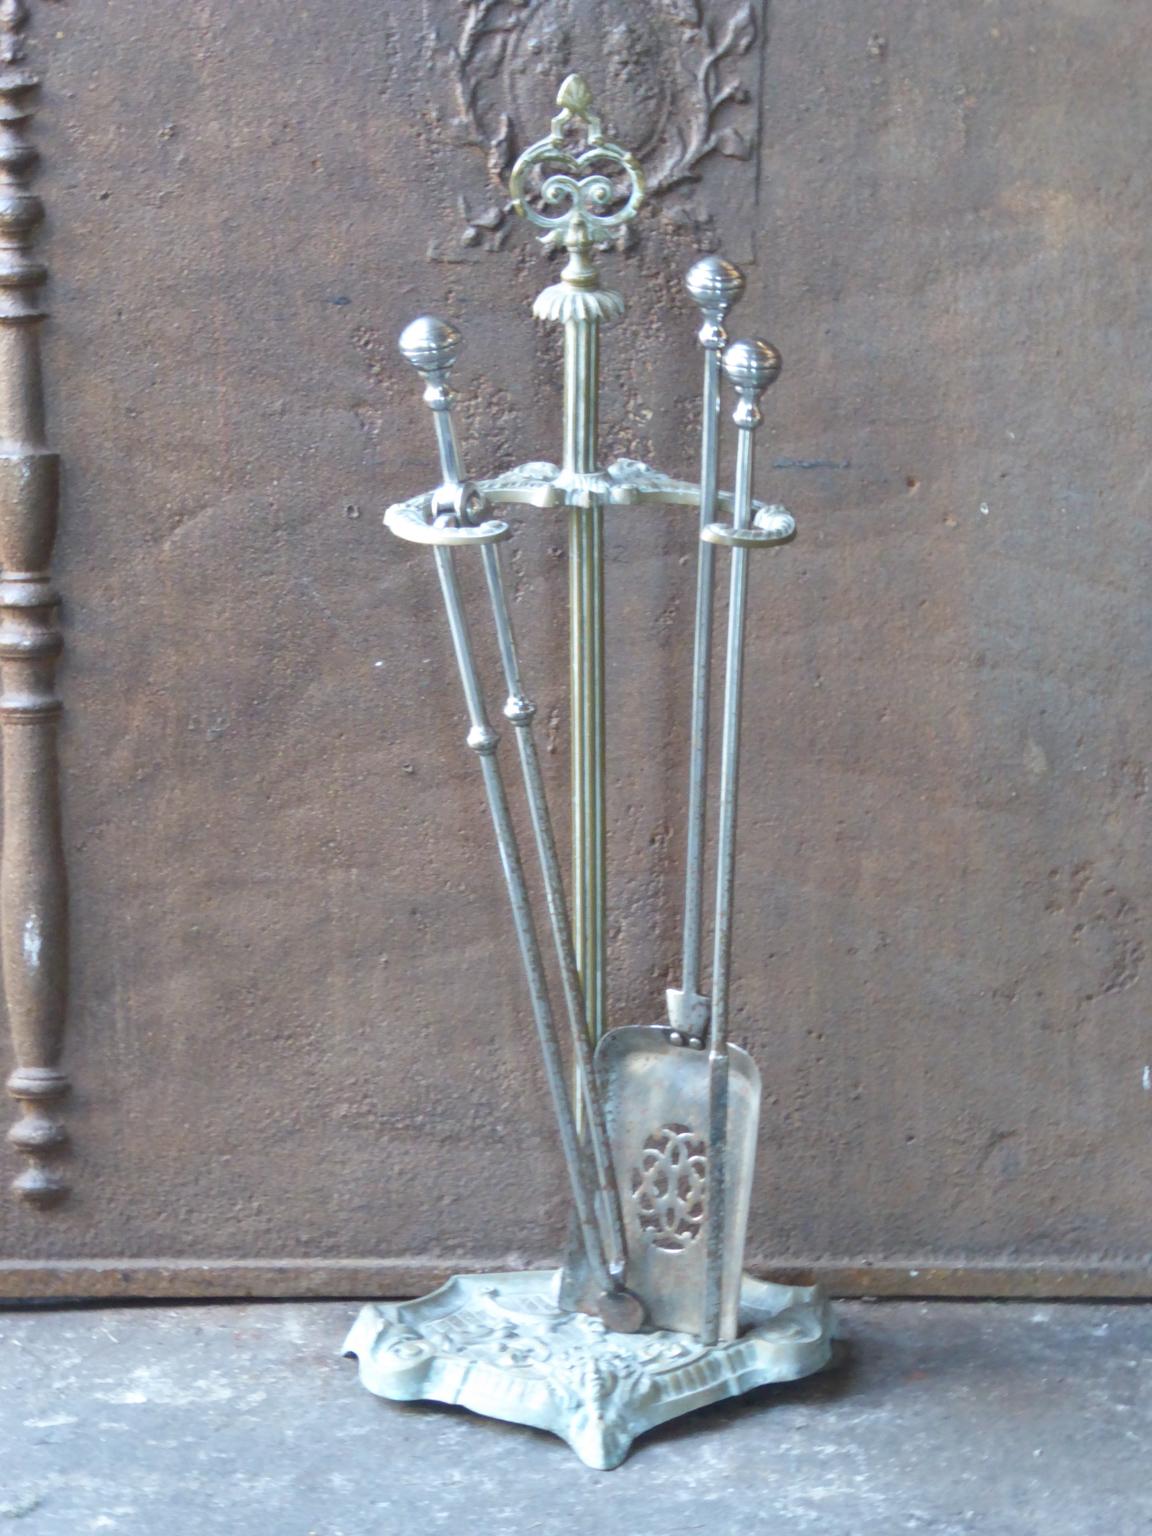 19th century English fireplace tools, fire irons made of polished steel and brass. Victorian period. The condition is good.







 